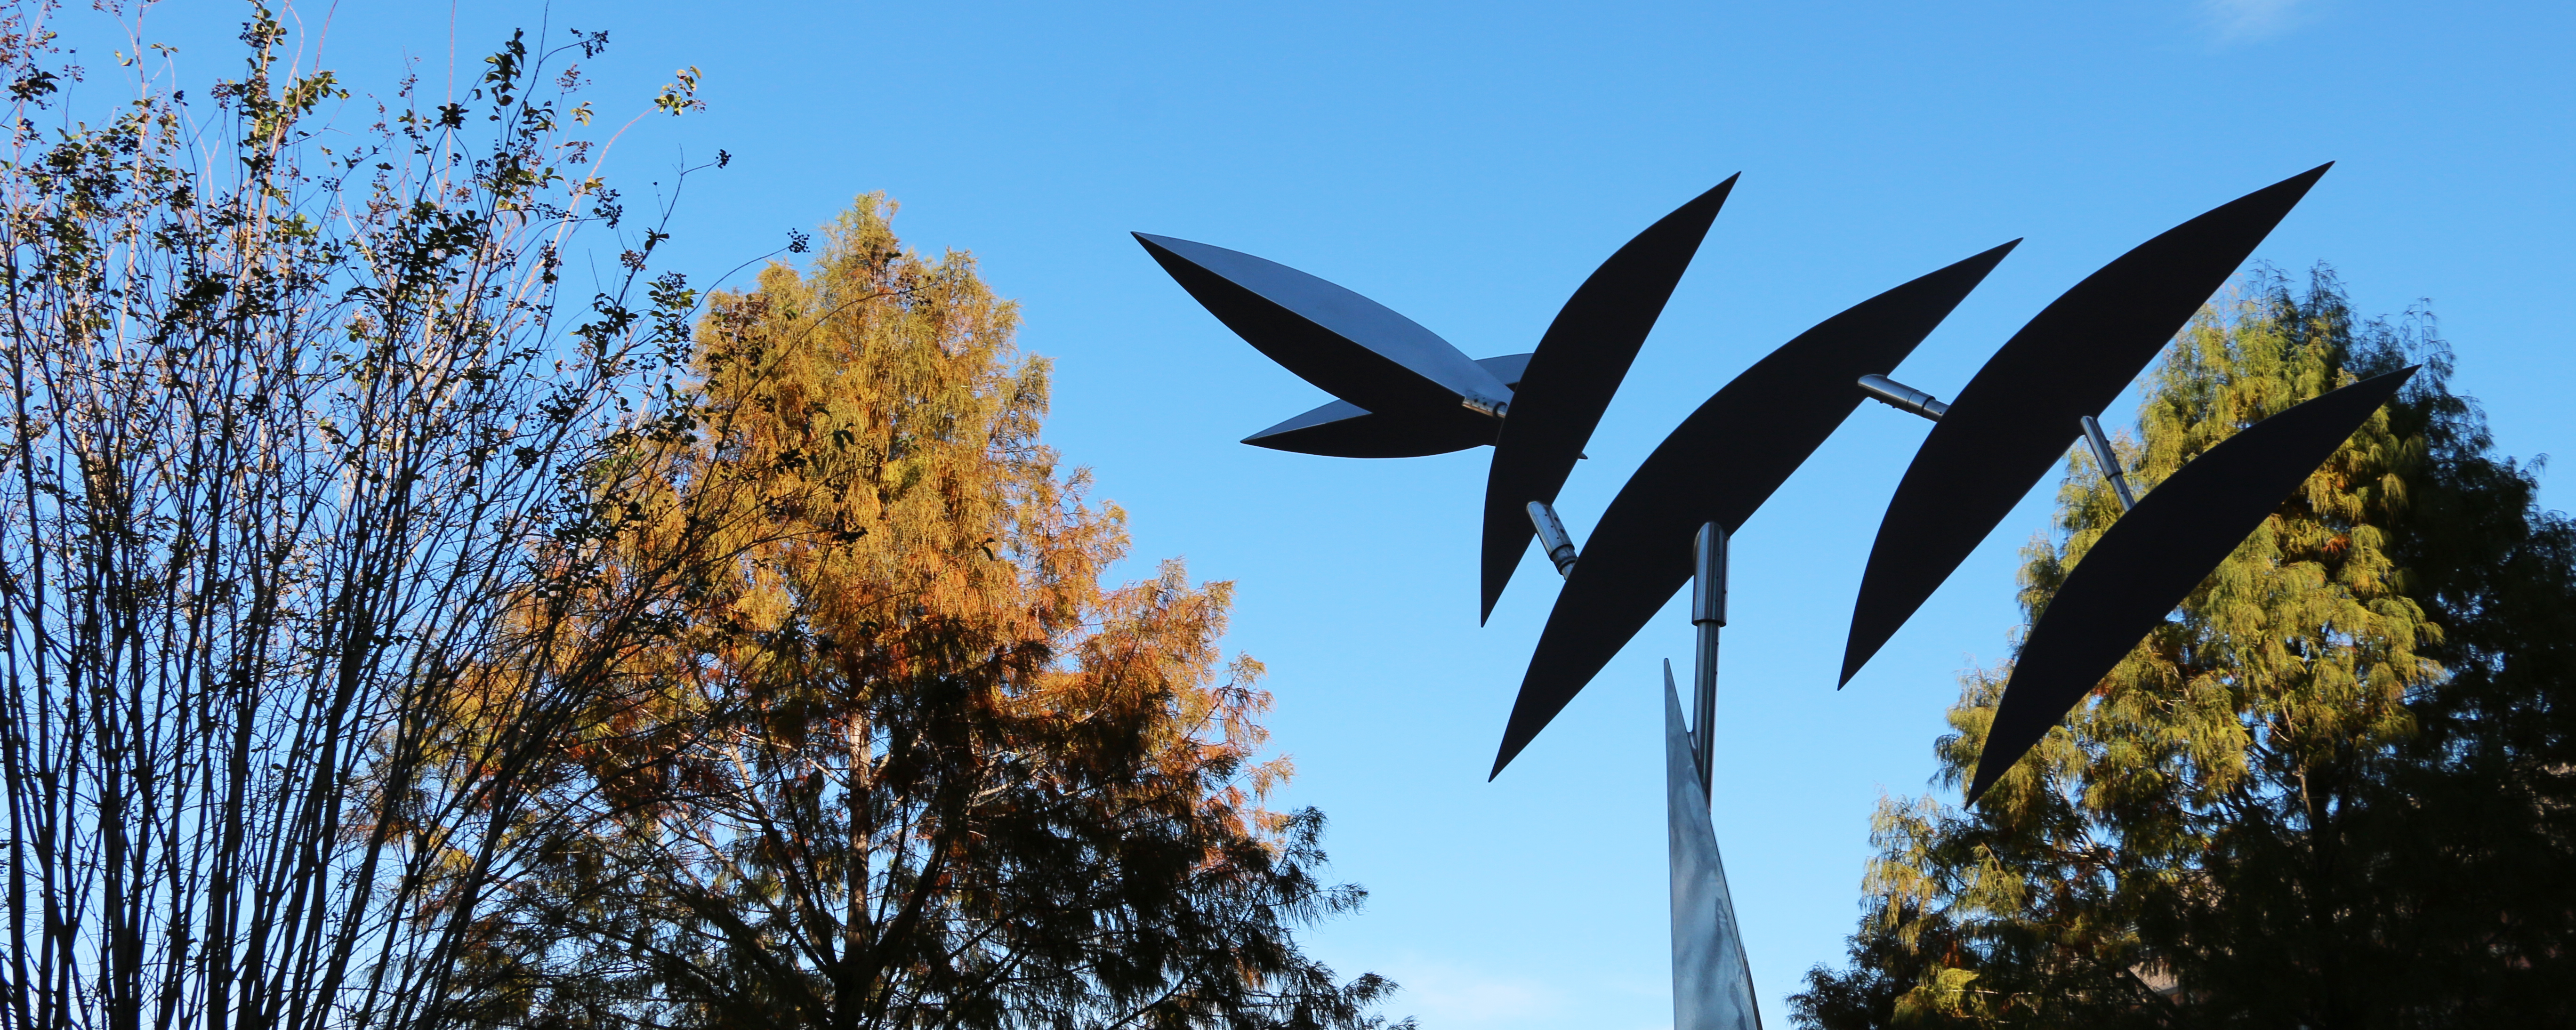 A metalic sculpture with leaf-like parts in the foreground and trees with red and green leaves in the background